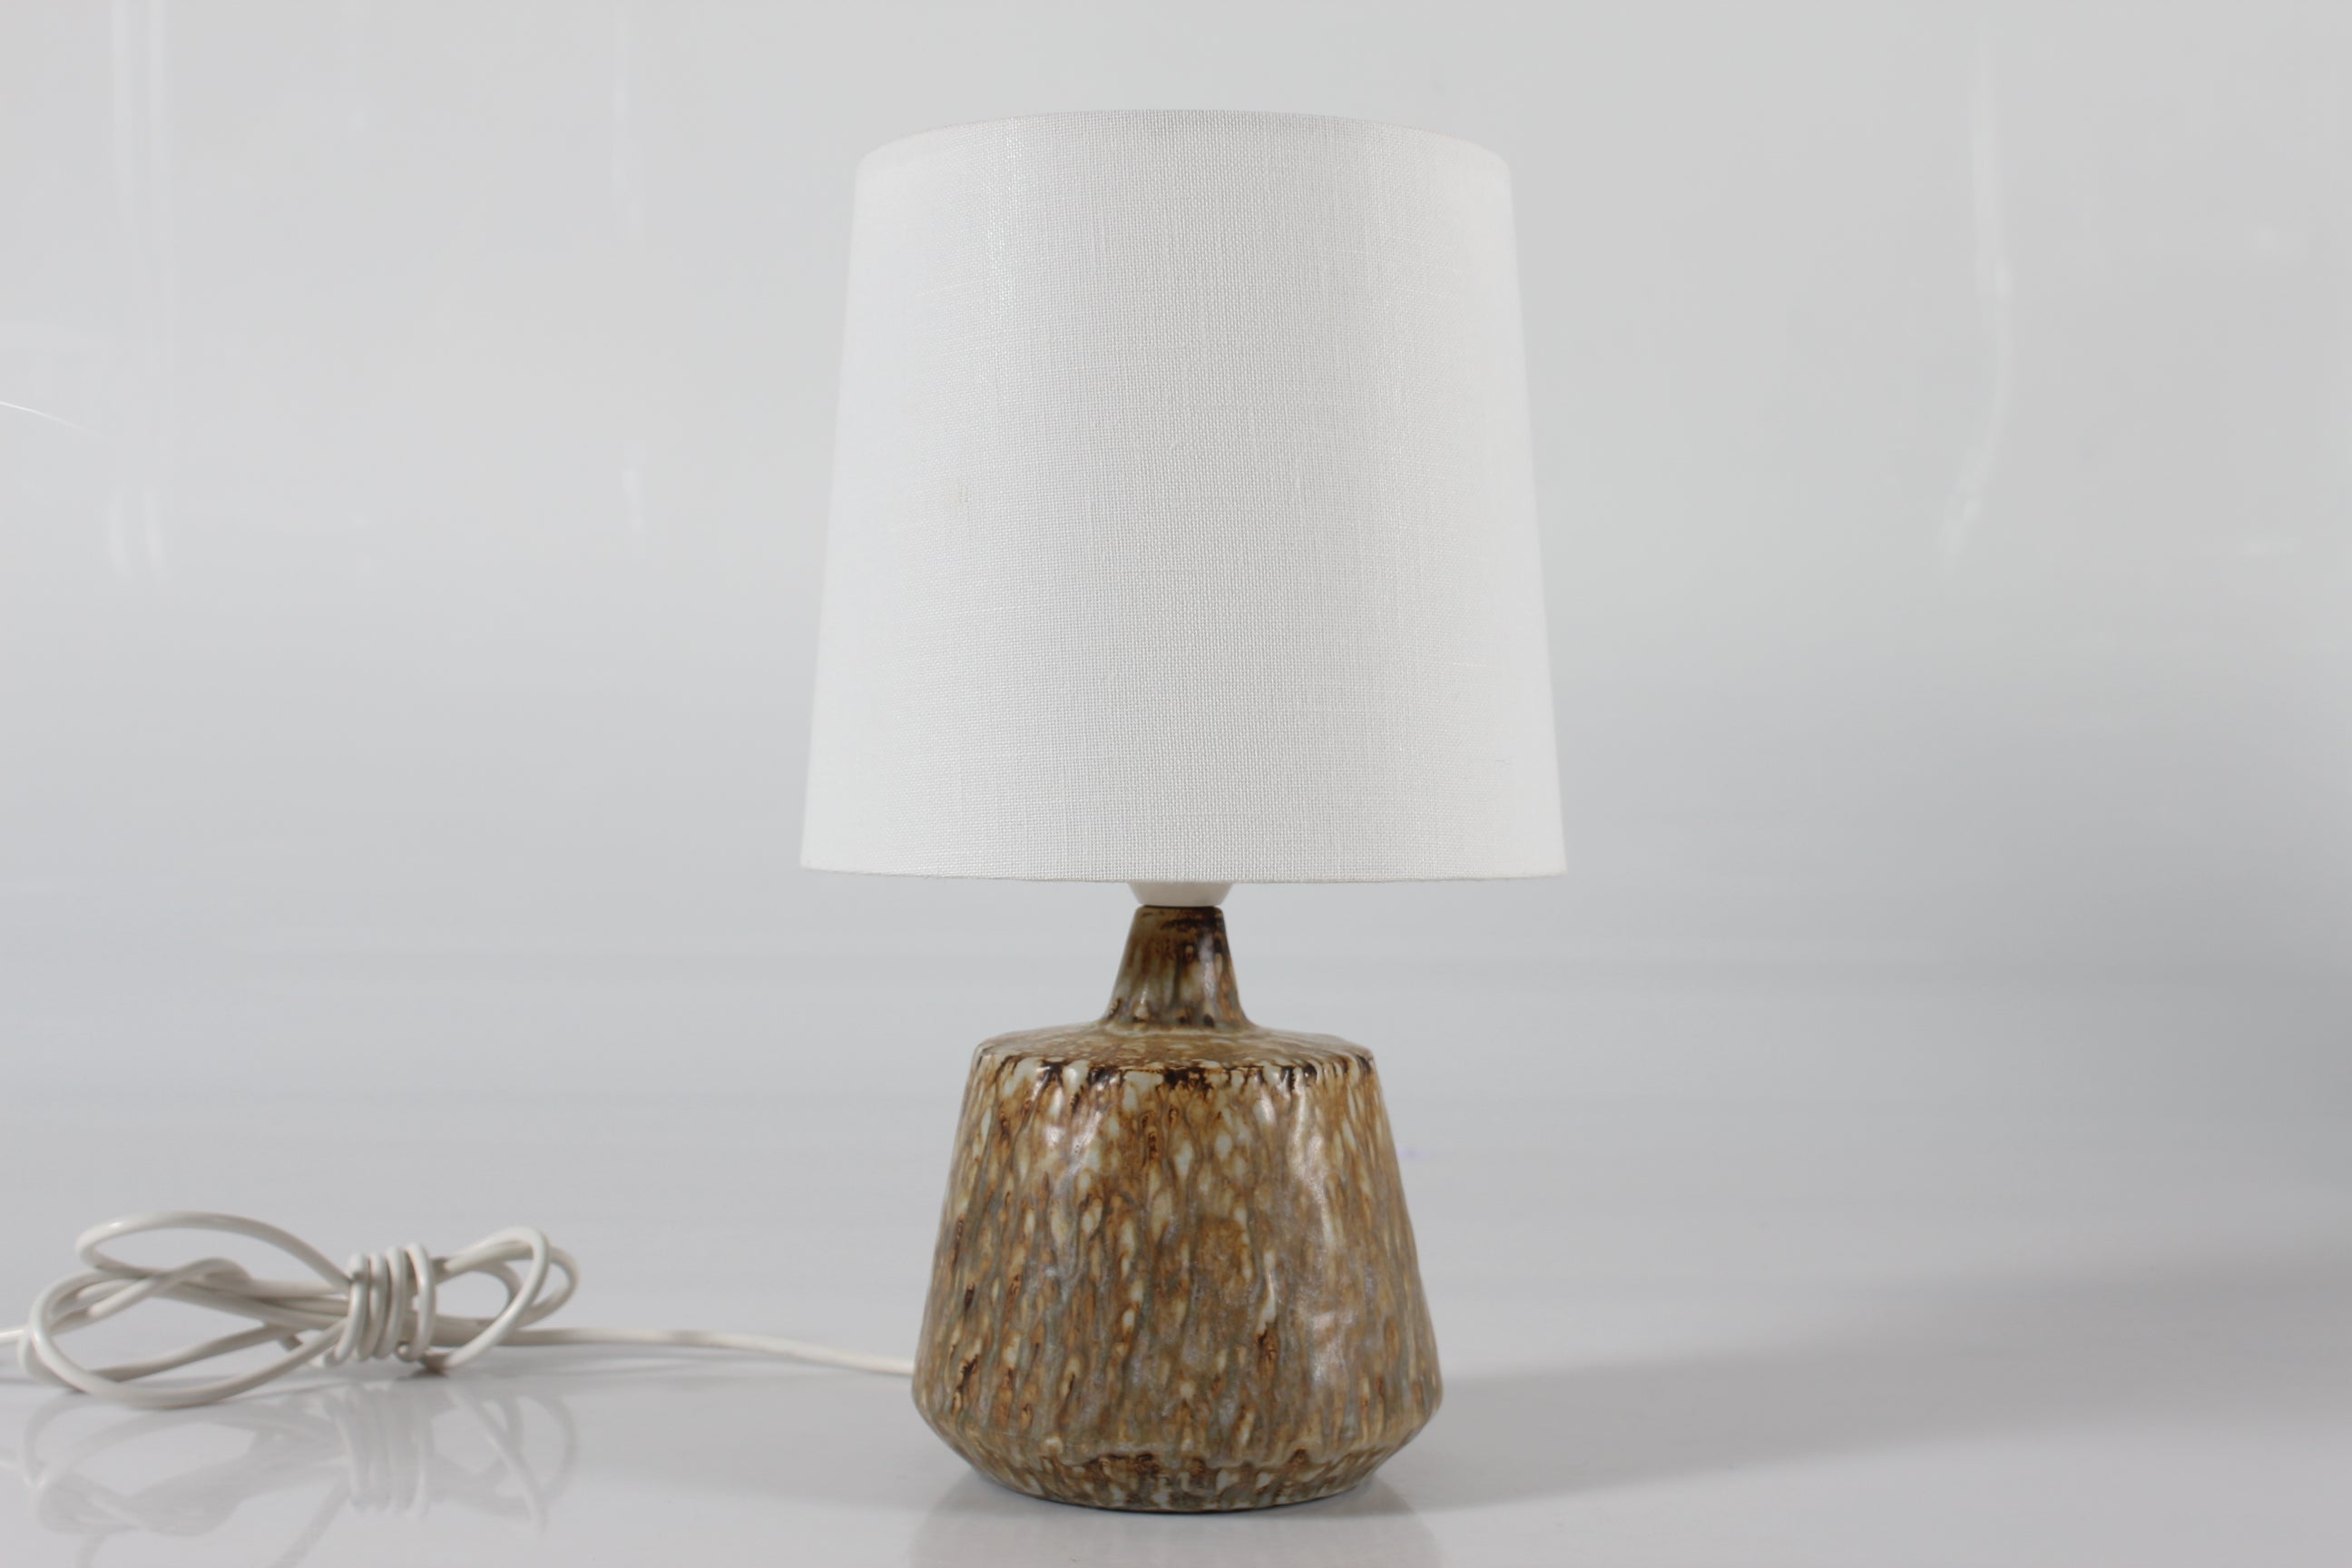 Ceramic table lamp by Gunnar Nylund for Rörstrand, Sweden.
It's part of the 